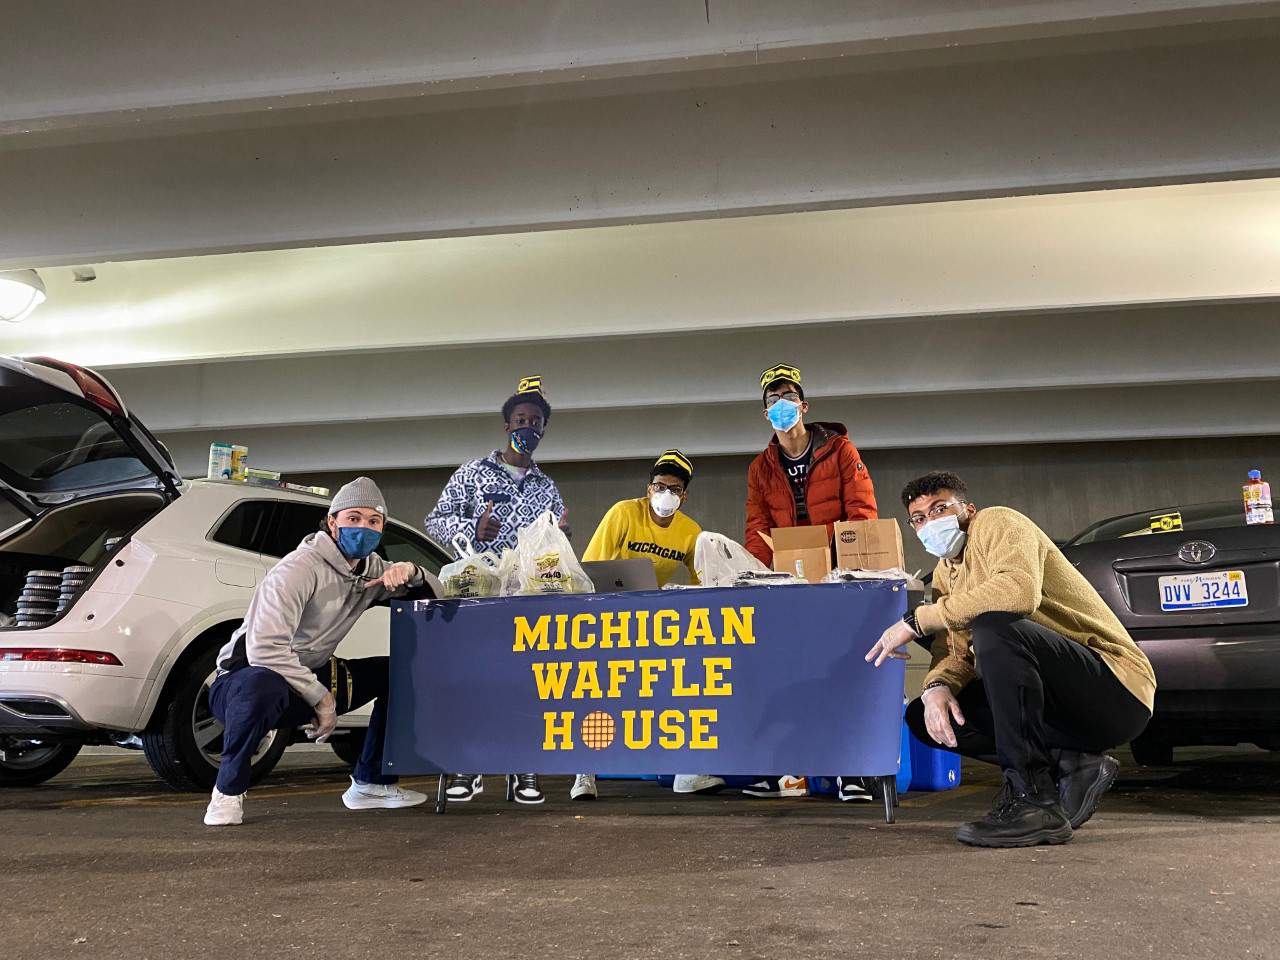 U-M students work to bring Michigan’s first Waffle House to Ann Arbor